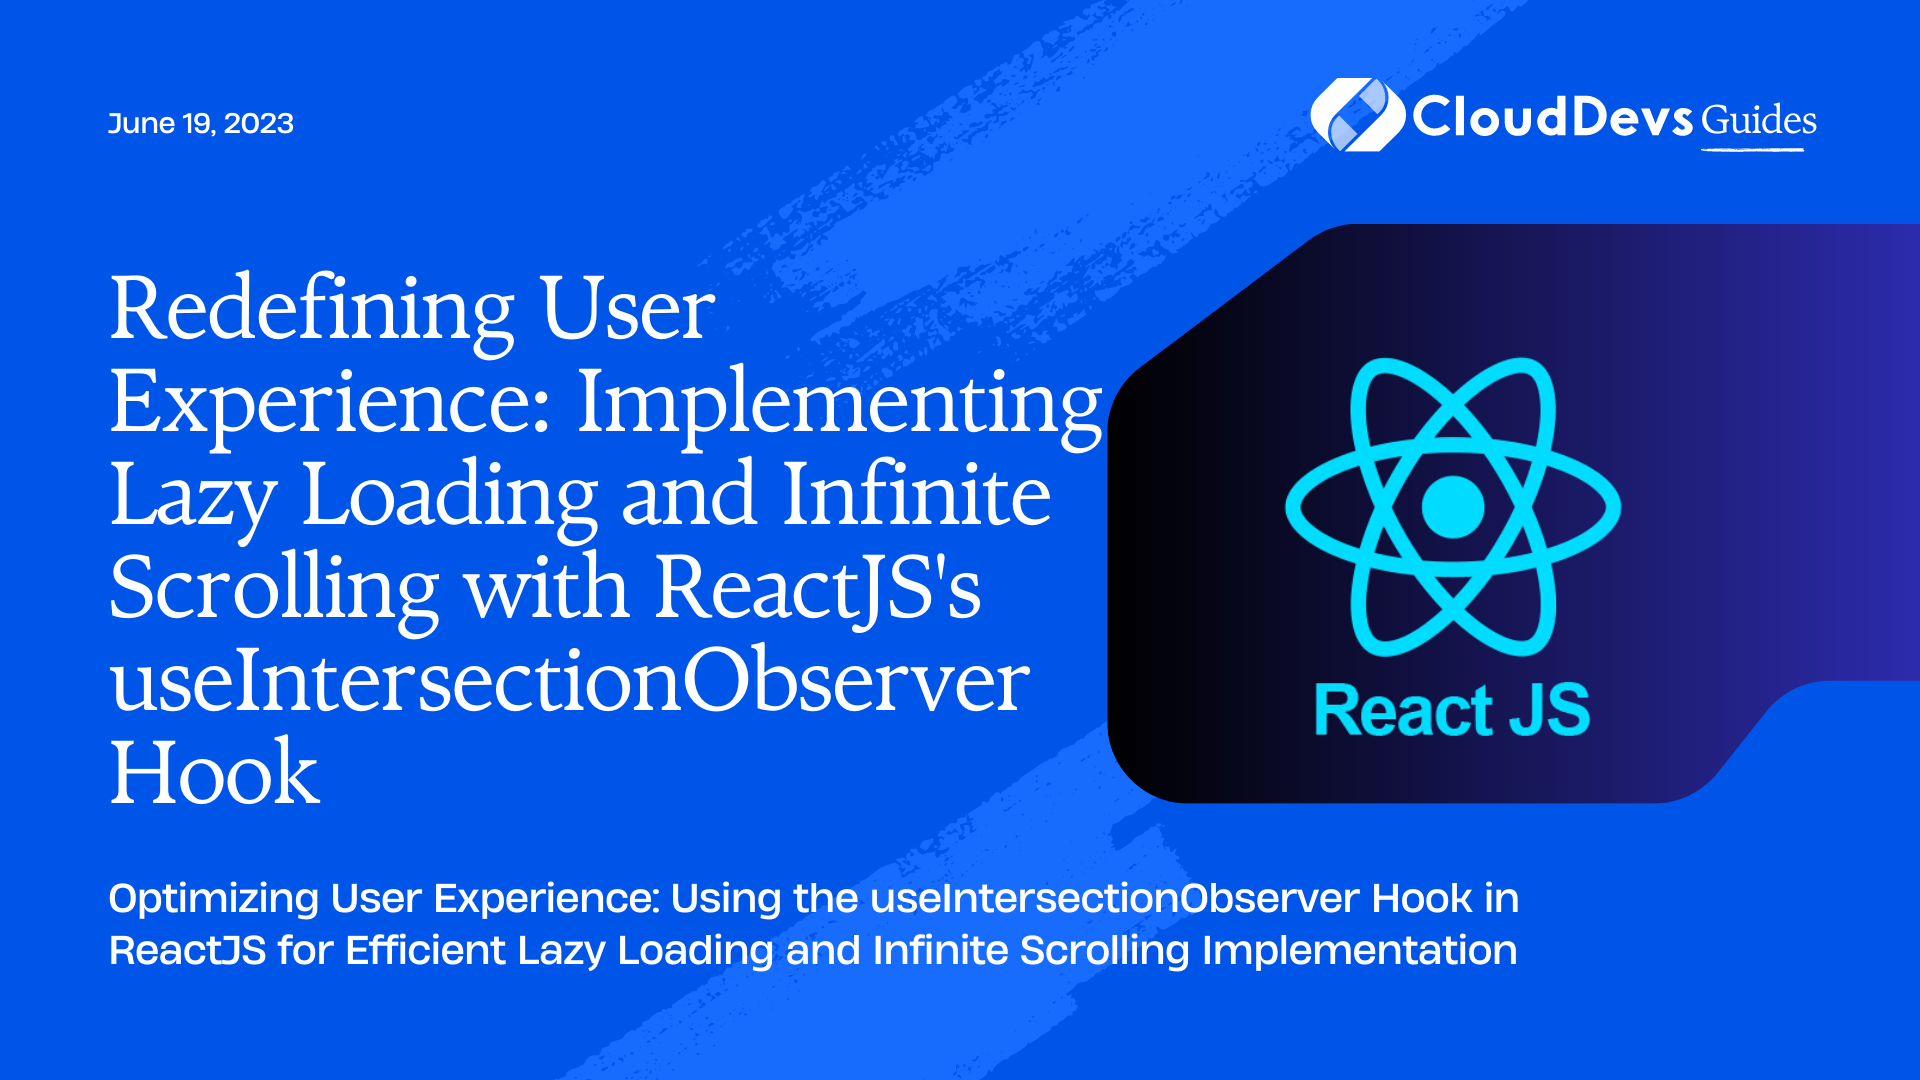 Redefining User Experience: Implementing Lazy Loading and Infinite Scrolling with ReactJS's useIntersectionObserver Hook